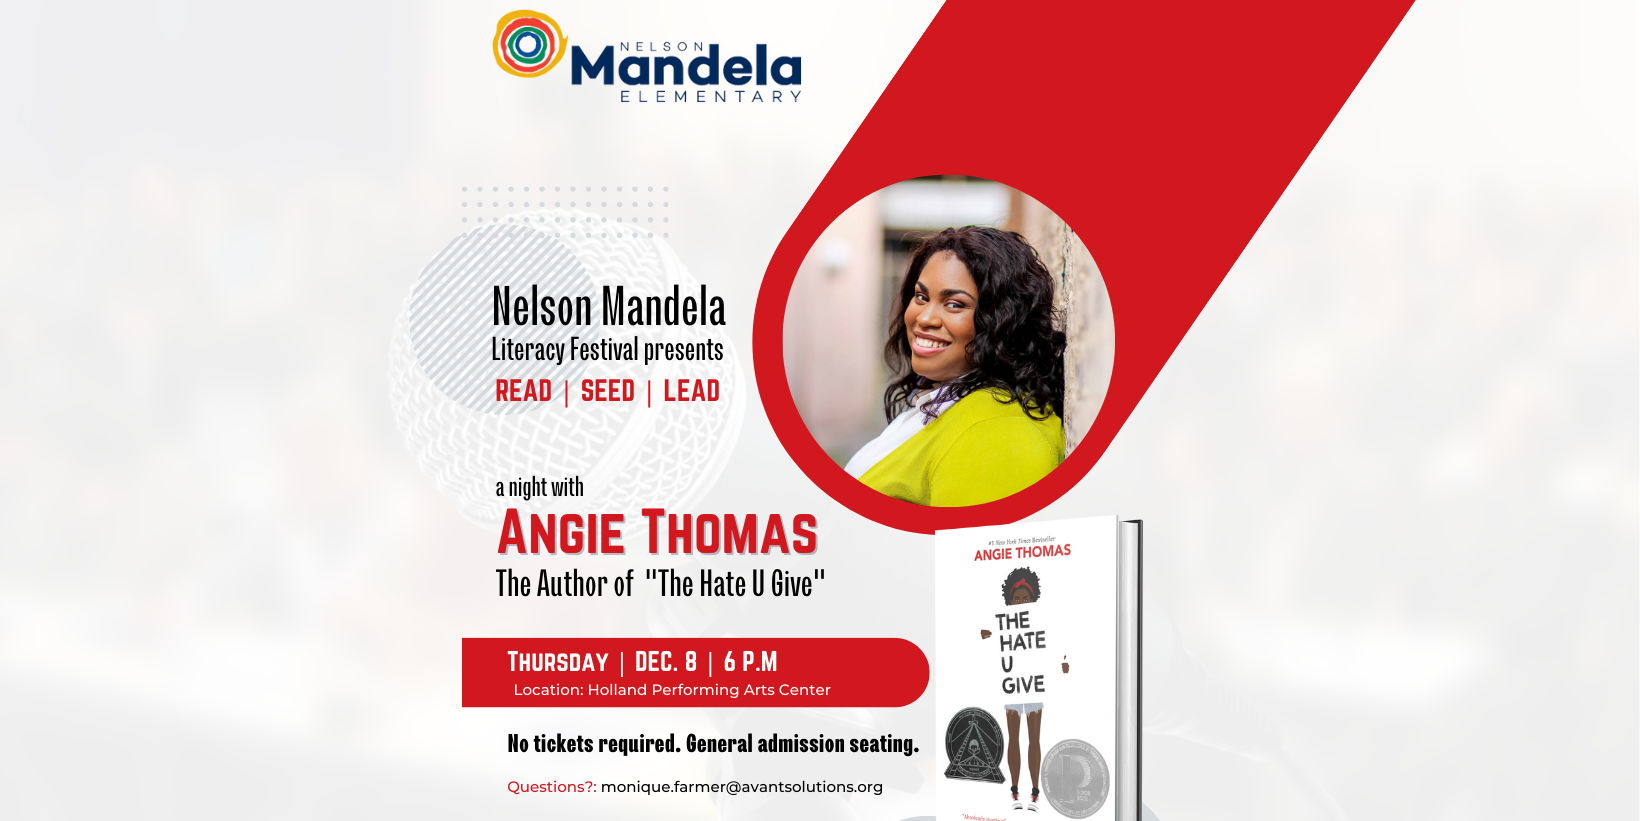 Nelson Mandela Literary Festival presents a night with Angie Thomas promotional image